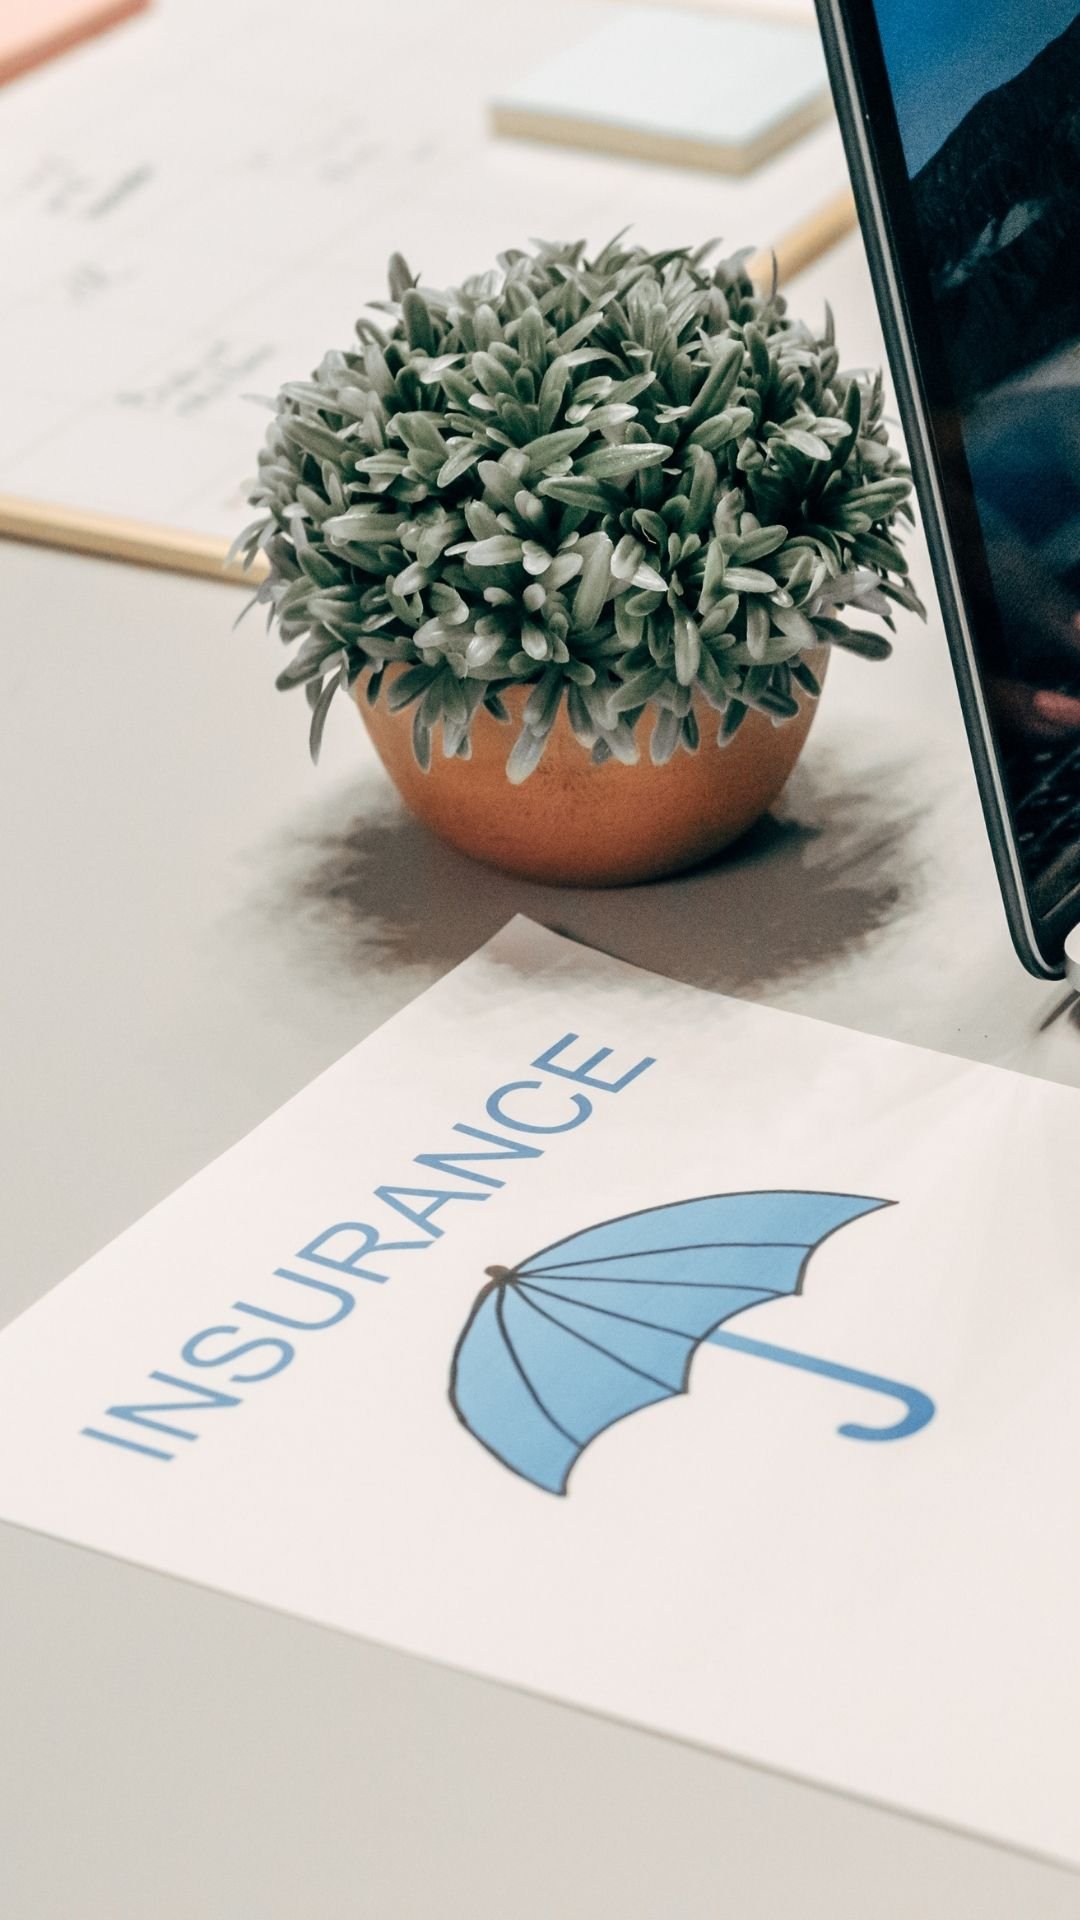 Small Business Insurance in BC